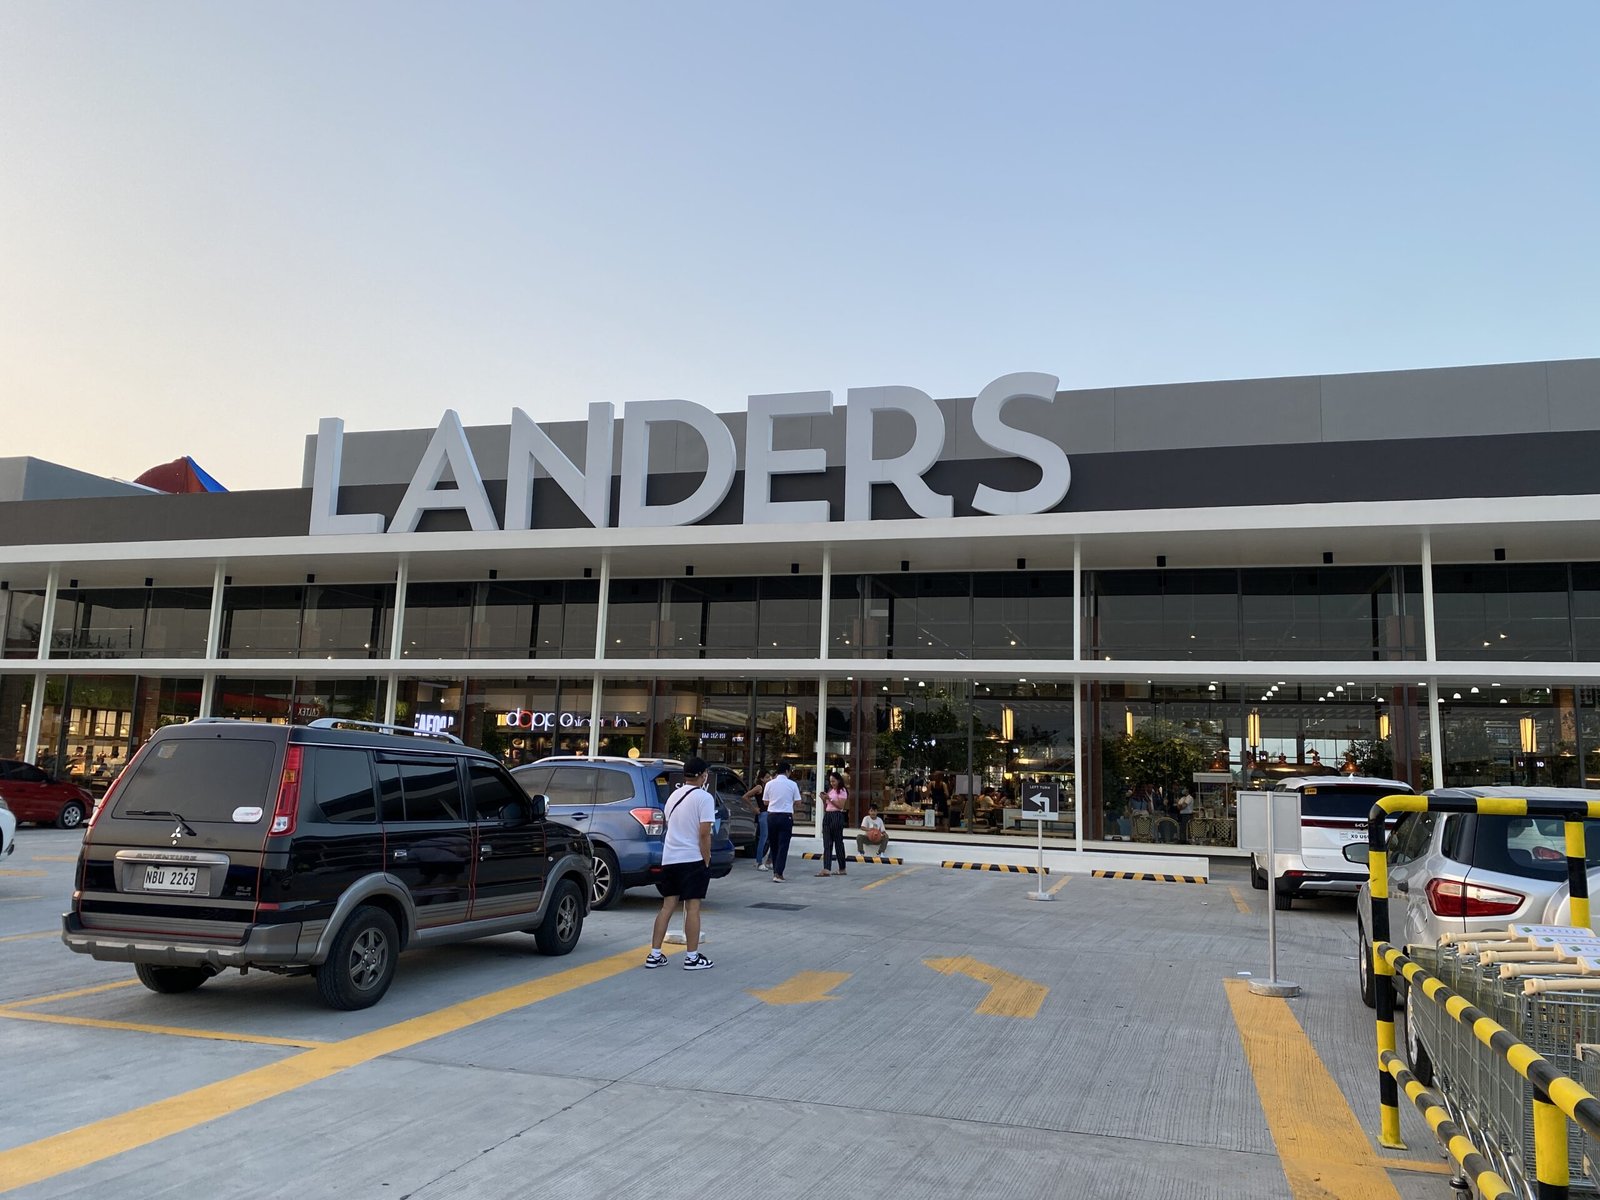 https://thevoicenewsweekly.com/wp-content/uploads/2023/04/Landers-Grand-Opening-4-scaled.jpg